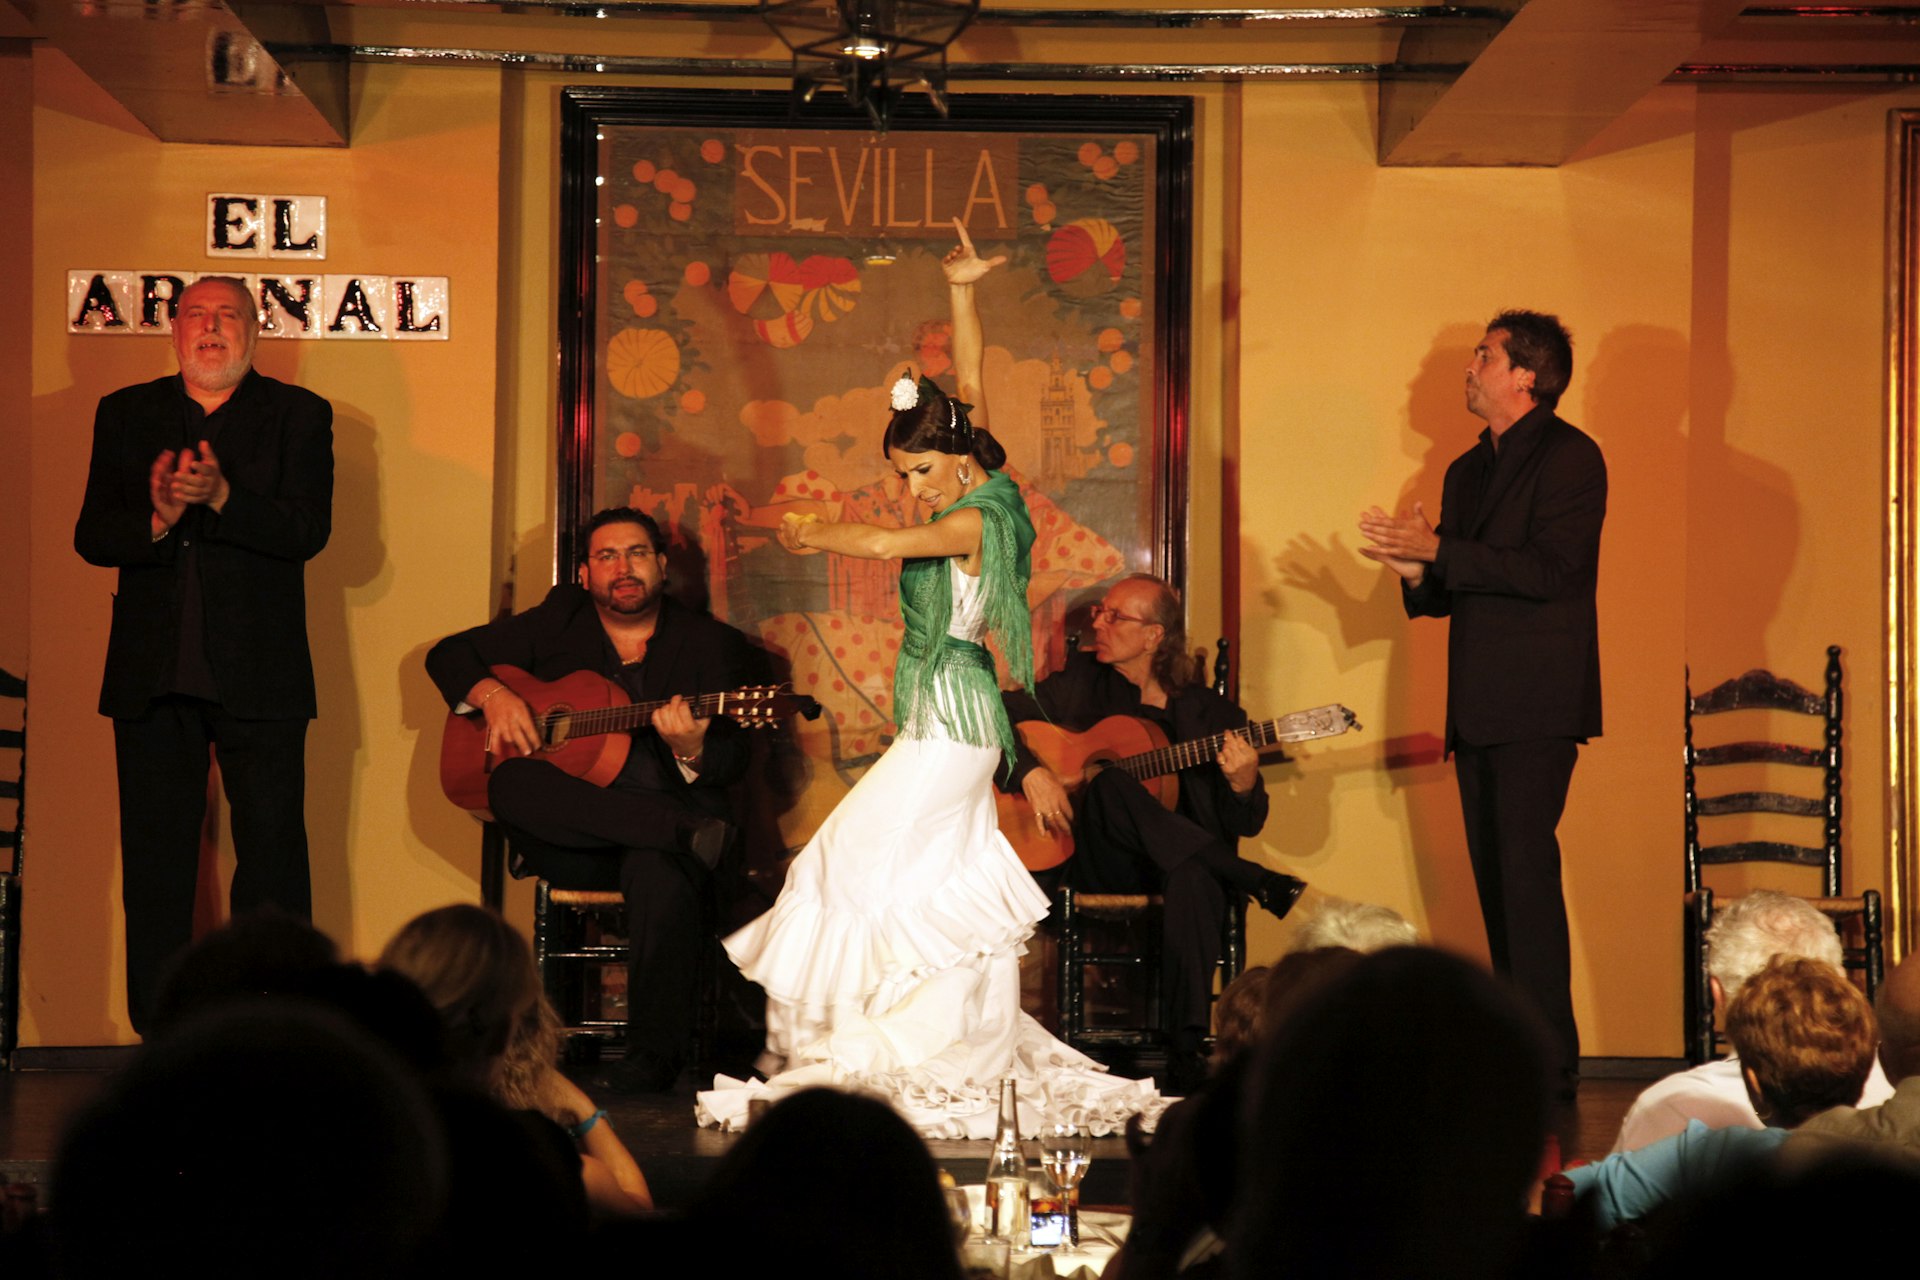 Maria Vargas Romero who's been a flamenco dancer for 25 years is performing at the tablao El Arenal, Seville, Andalucia, Spain.